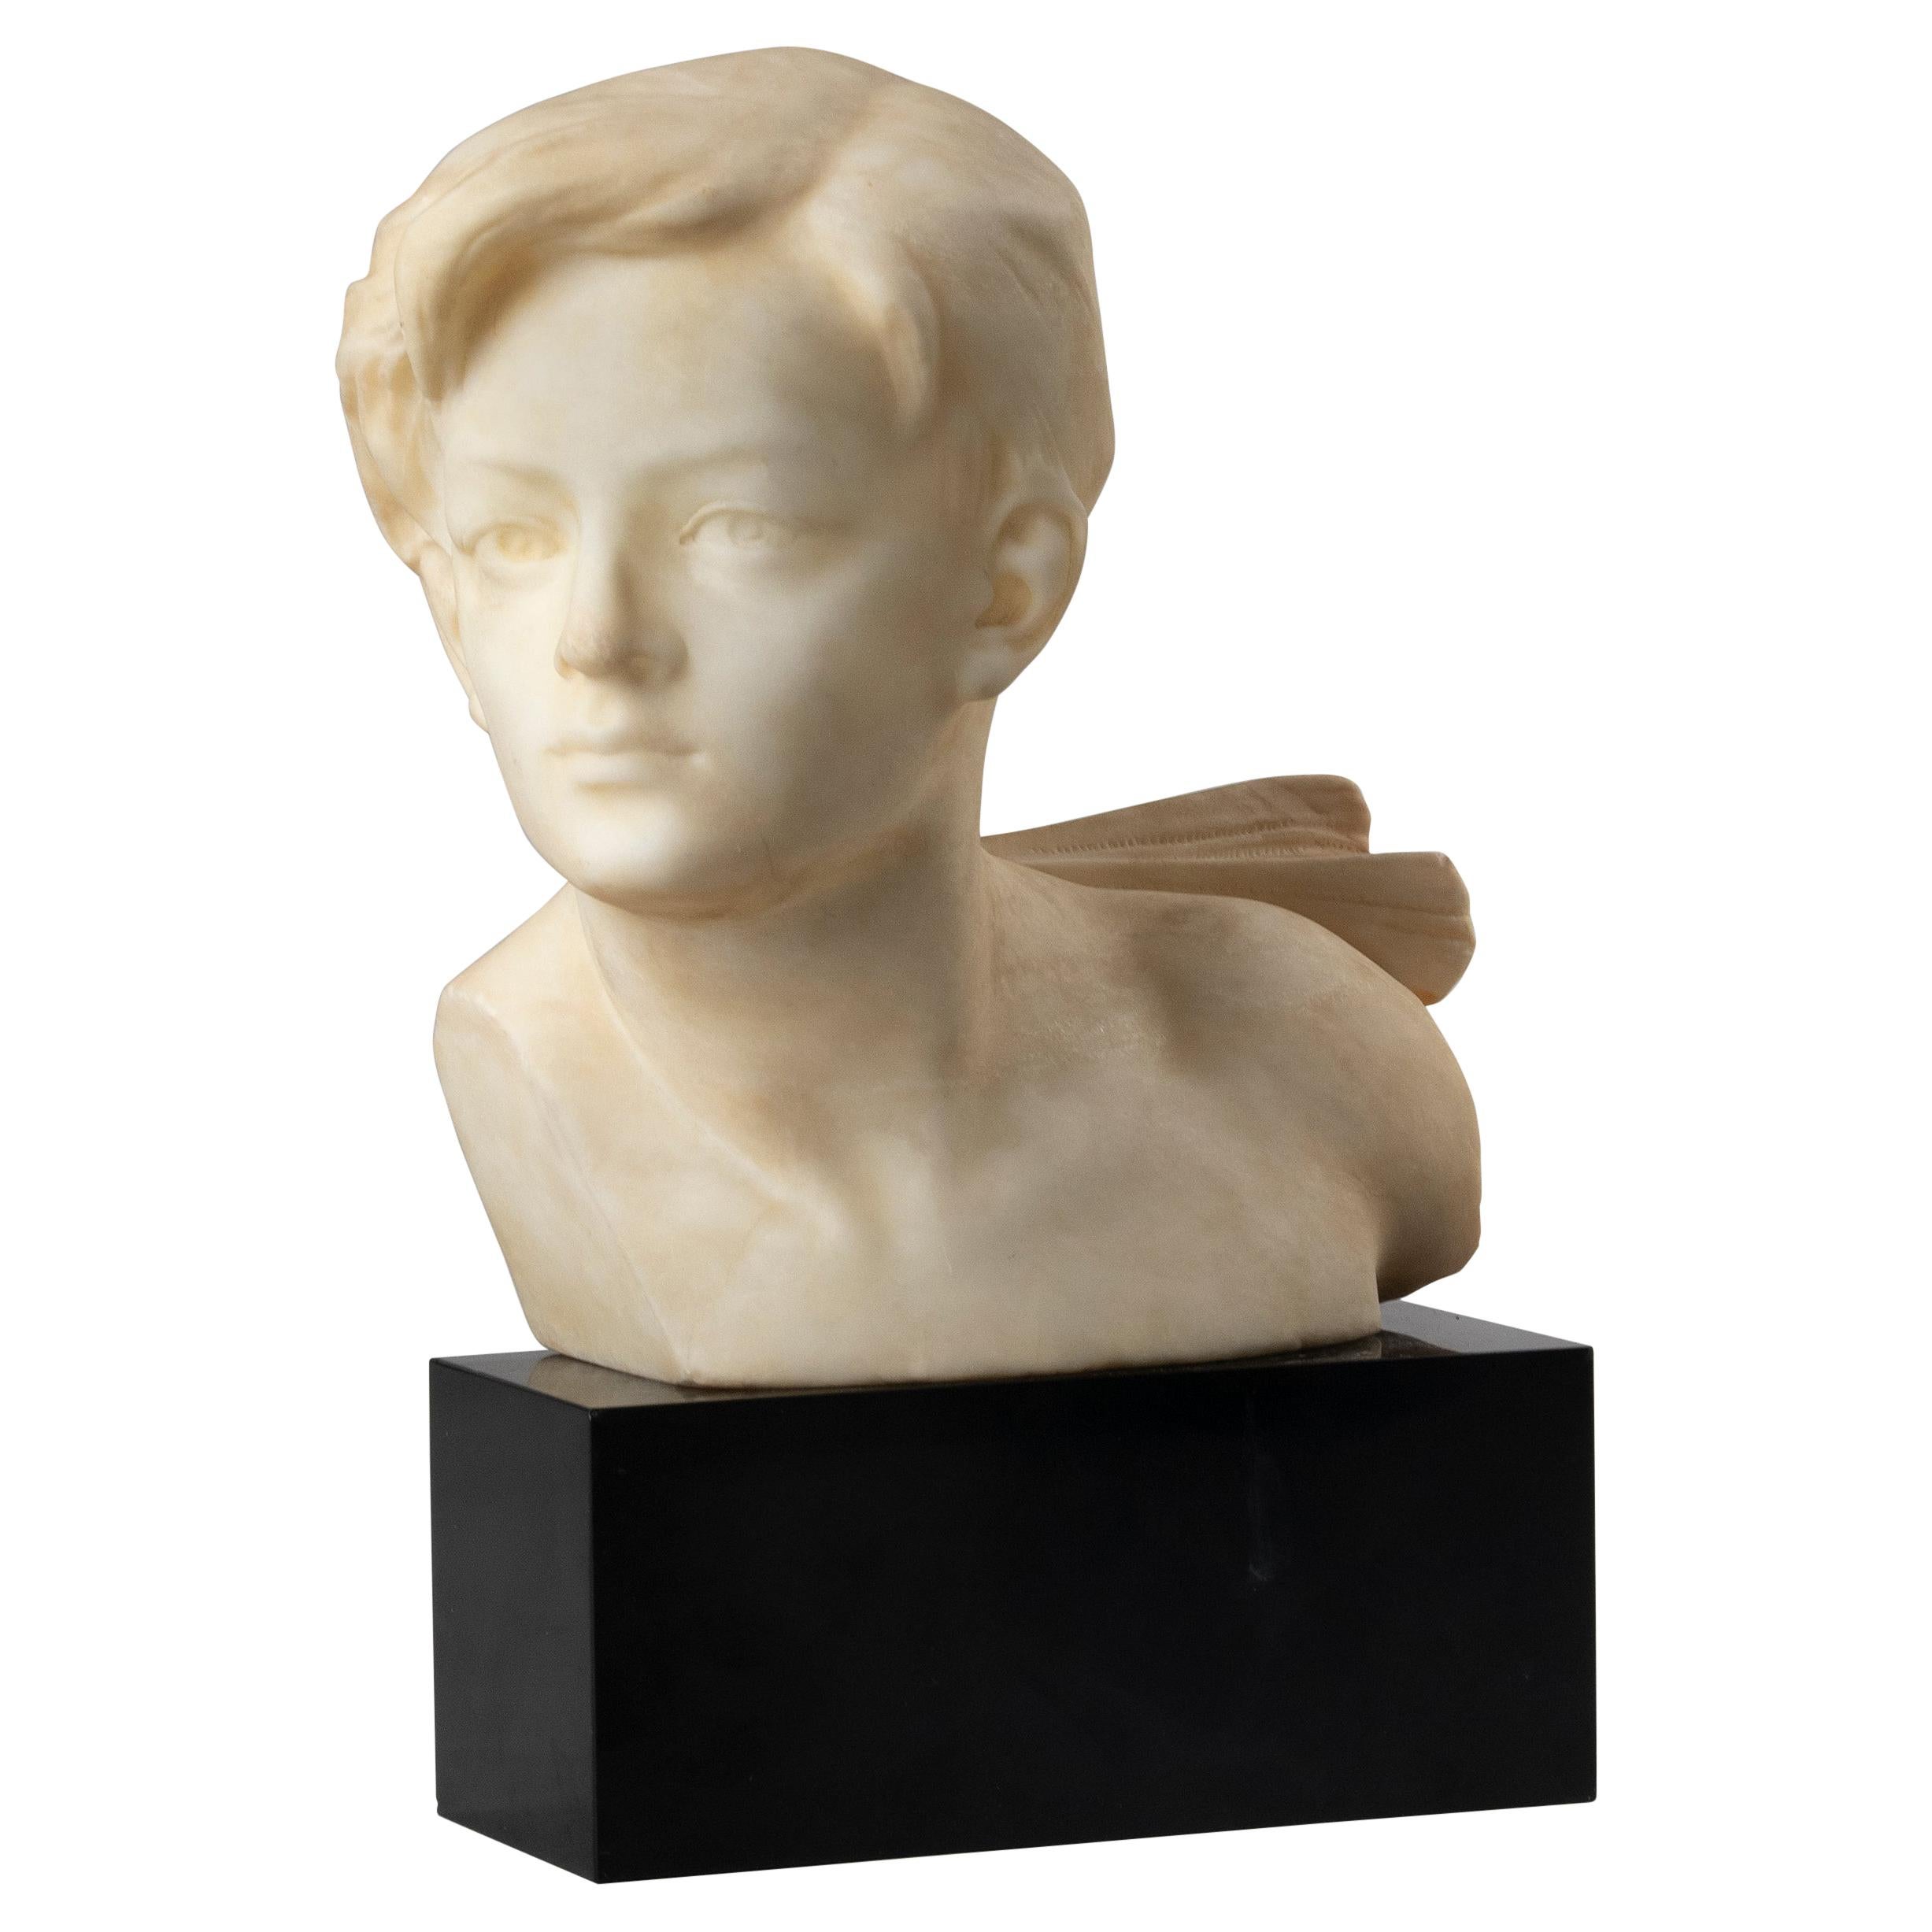 Alabaster and Marble Art Deco Sculpture of a Boy by Affortunato Gory